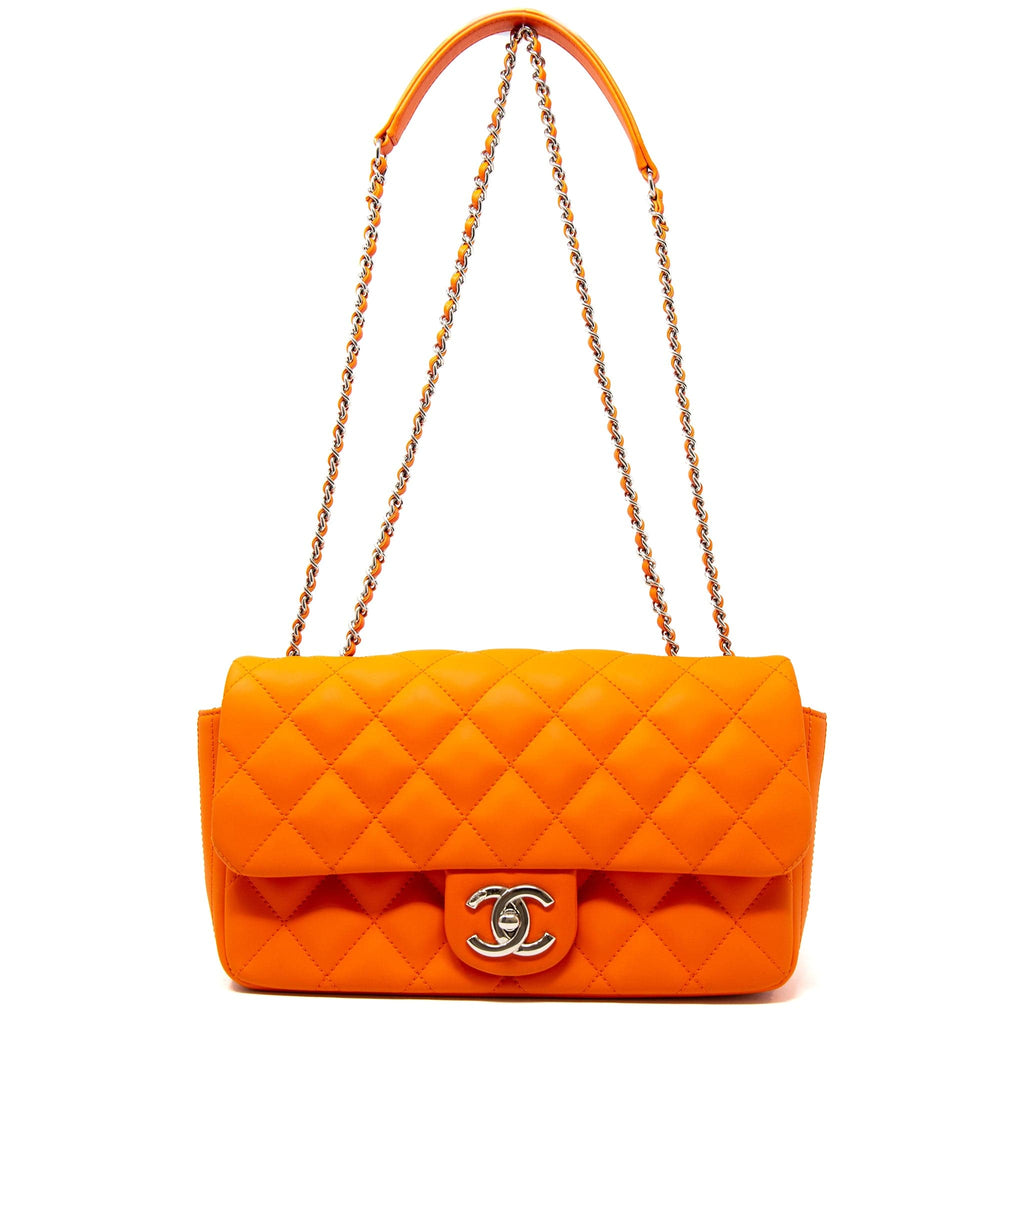 Rare Chanel bright orange coated leather single flap bag with